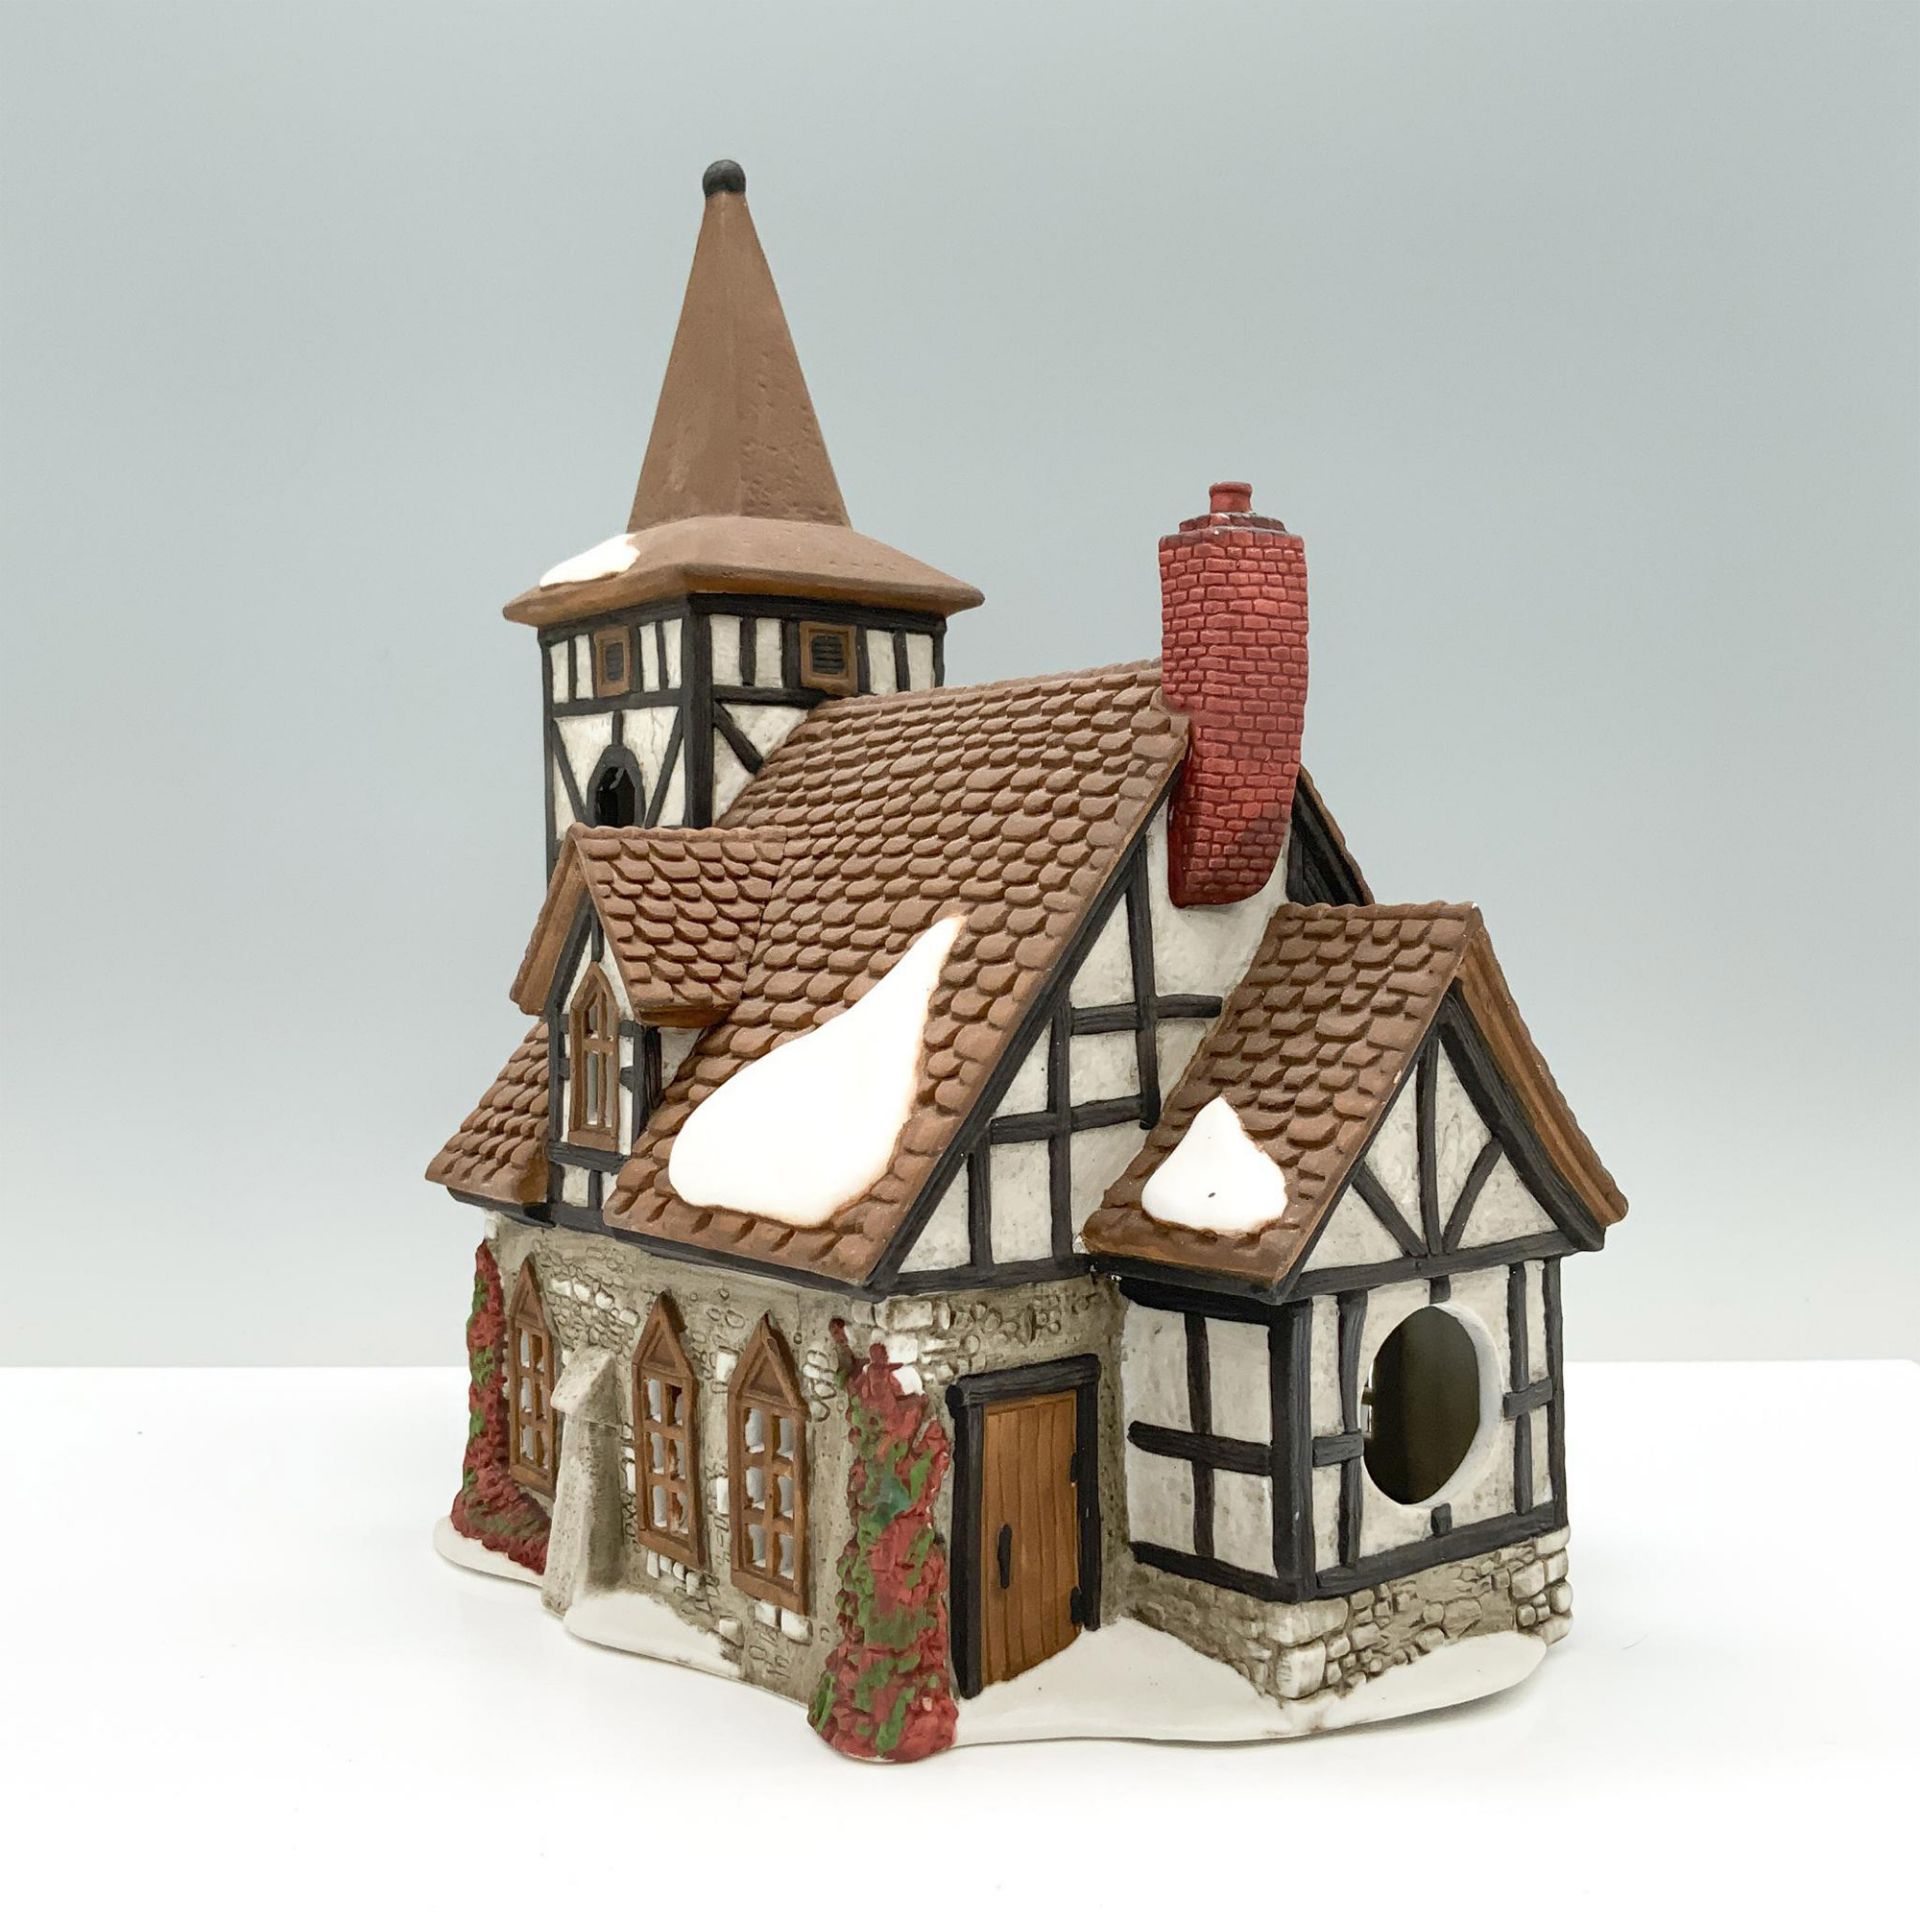 Department 56 Dickens Village Figurine, Old Michael Church - Image 2 of 3